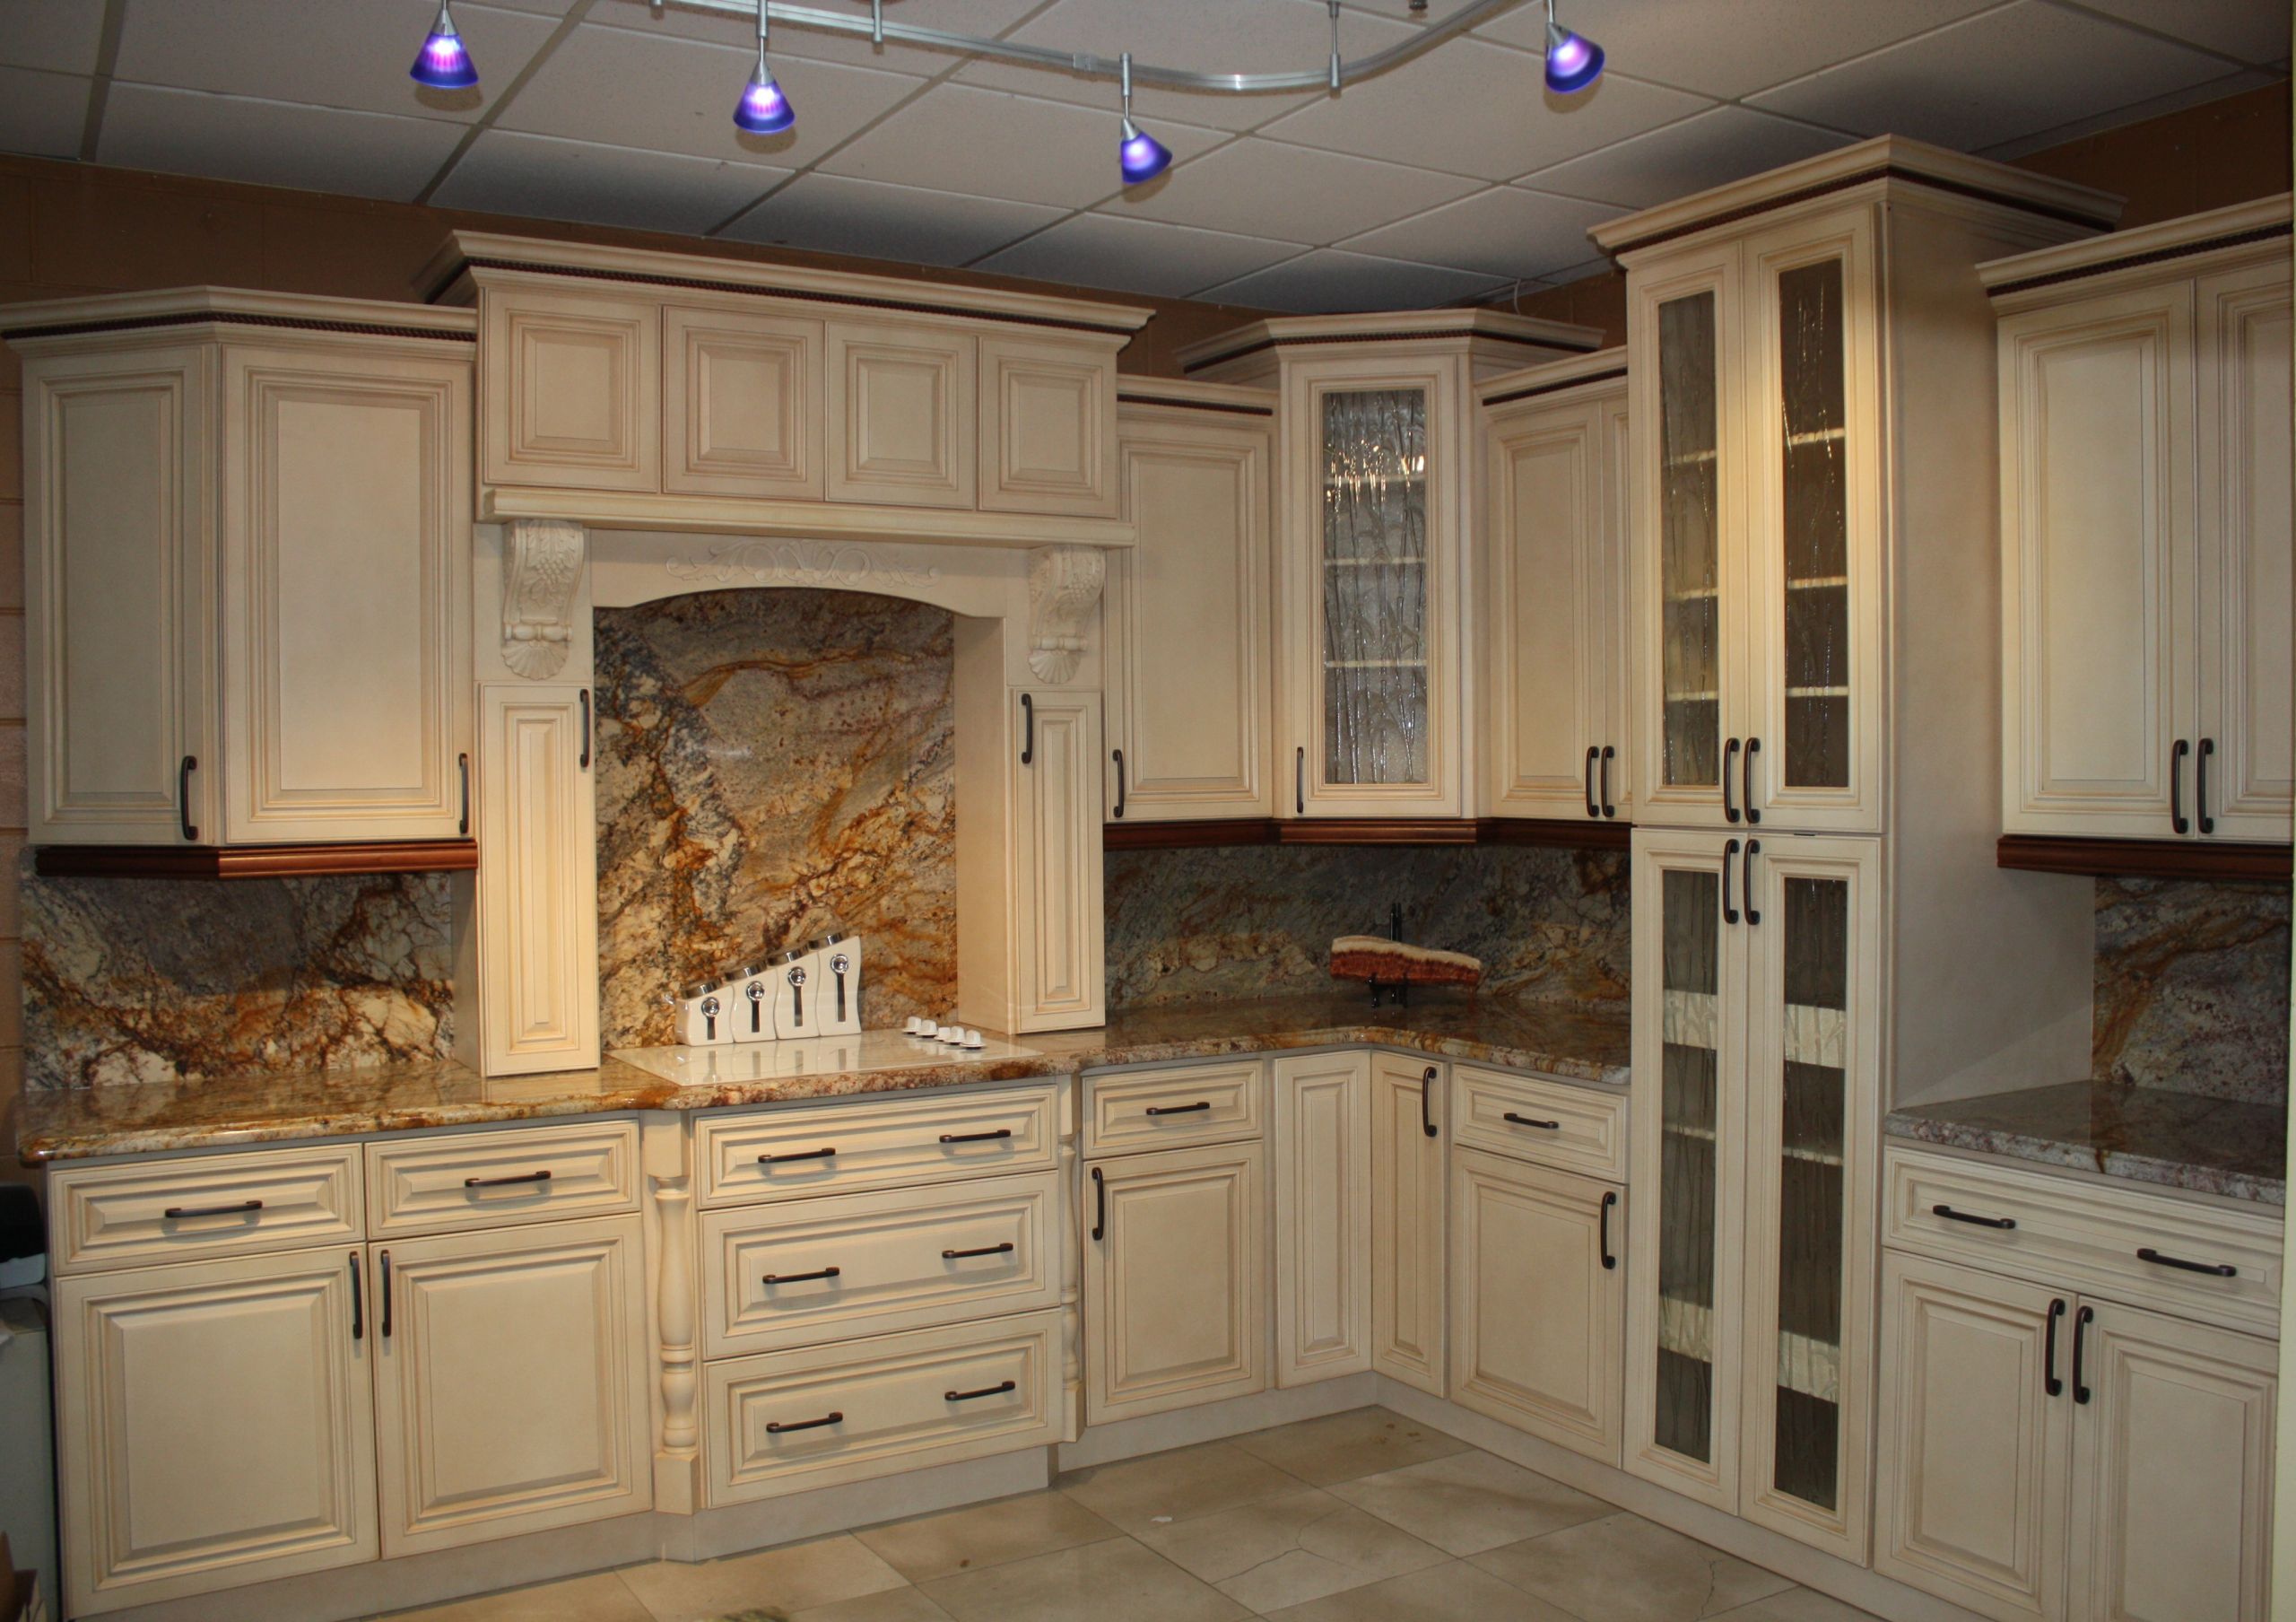 Antiqued Kitchen Cabinets
 Antique White Cabinets